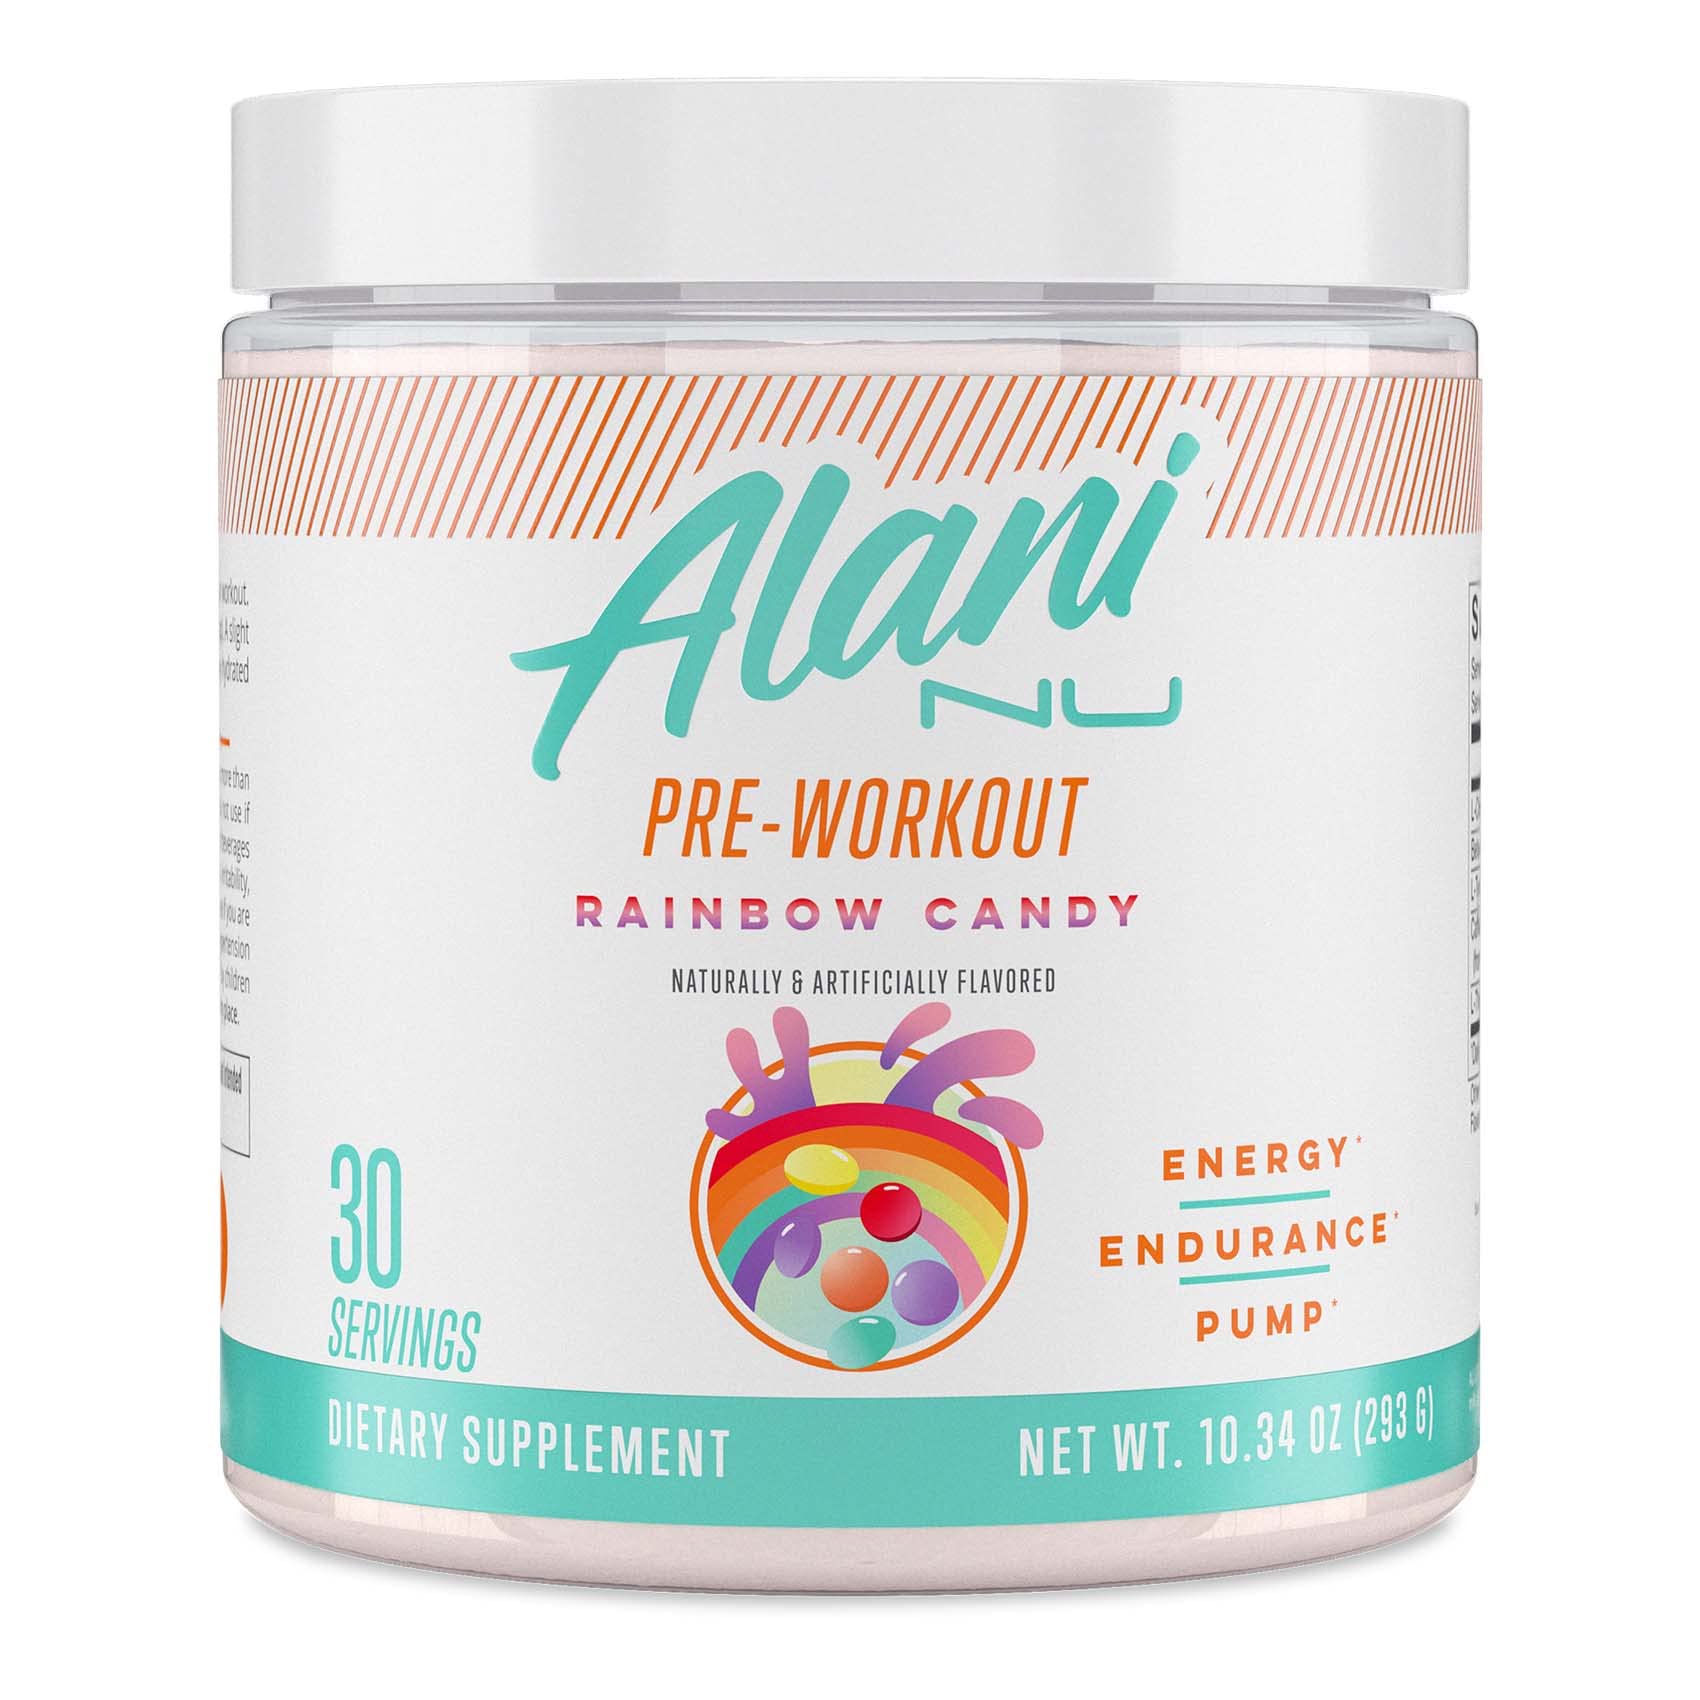 Book Cover Alani Nu Pre Workout Supplement Powder for Energy, Endurance & Pump | Sugar Free | 200mg Caffeine | Formulated with Amino Acids Like L-Theanine to Prevent Crashing | Rainbow Candy, 30 Servings